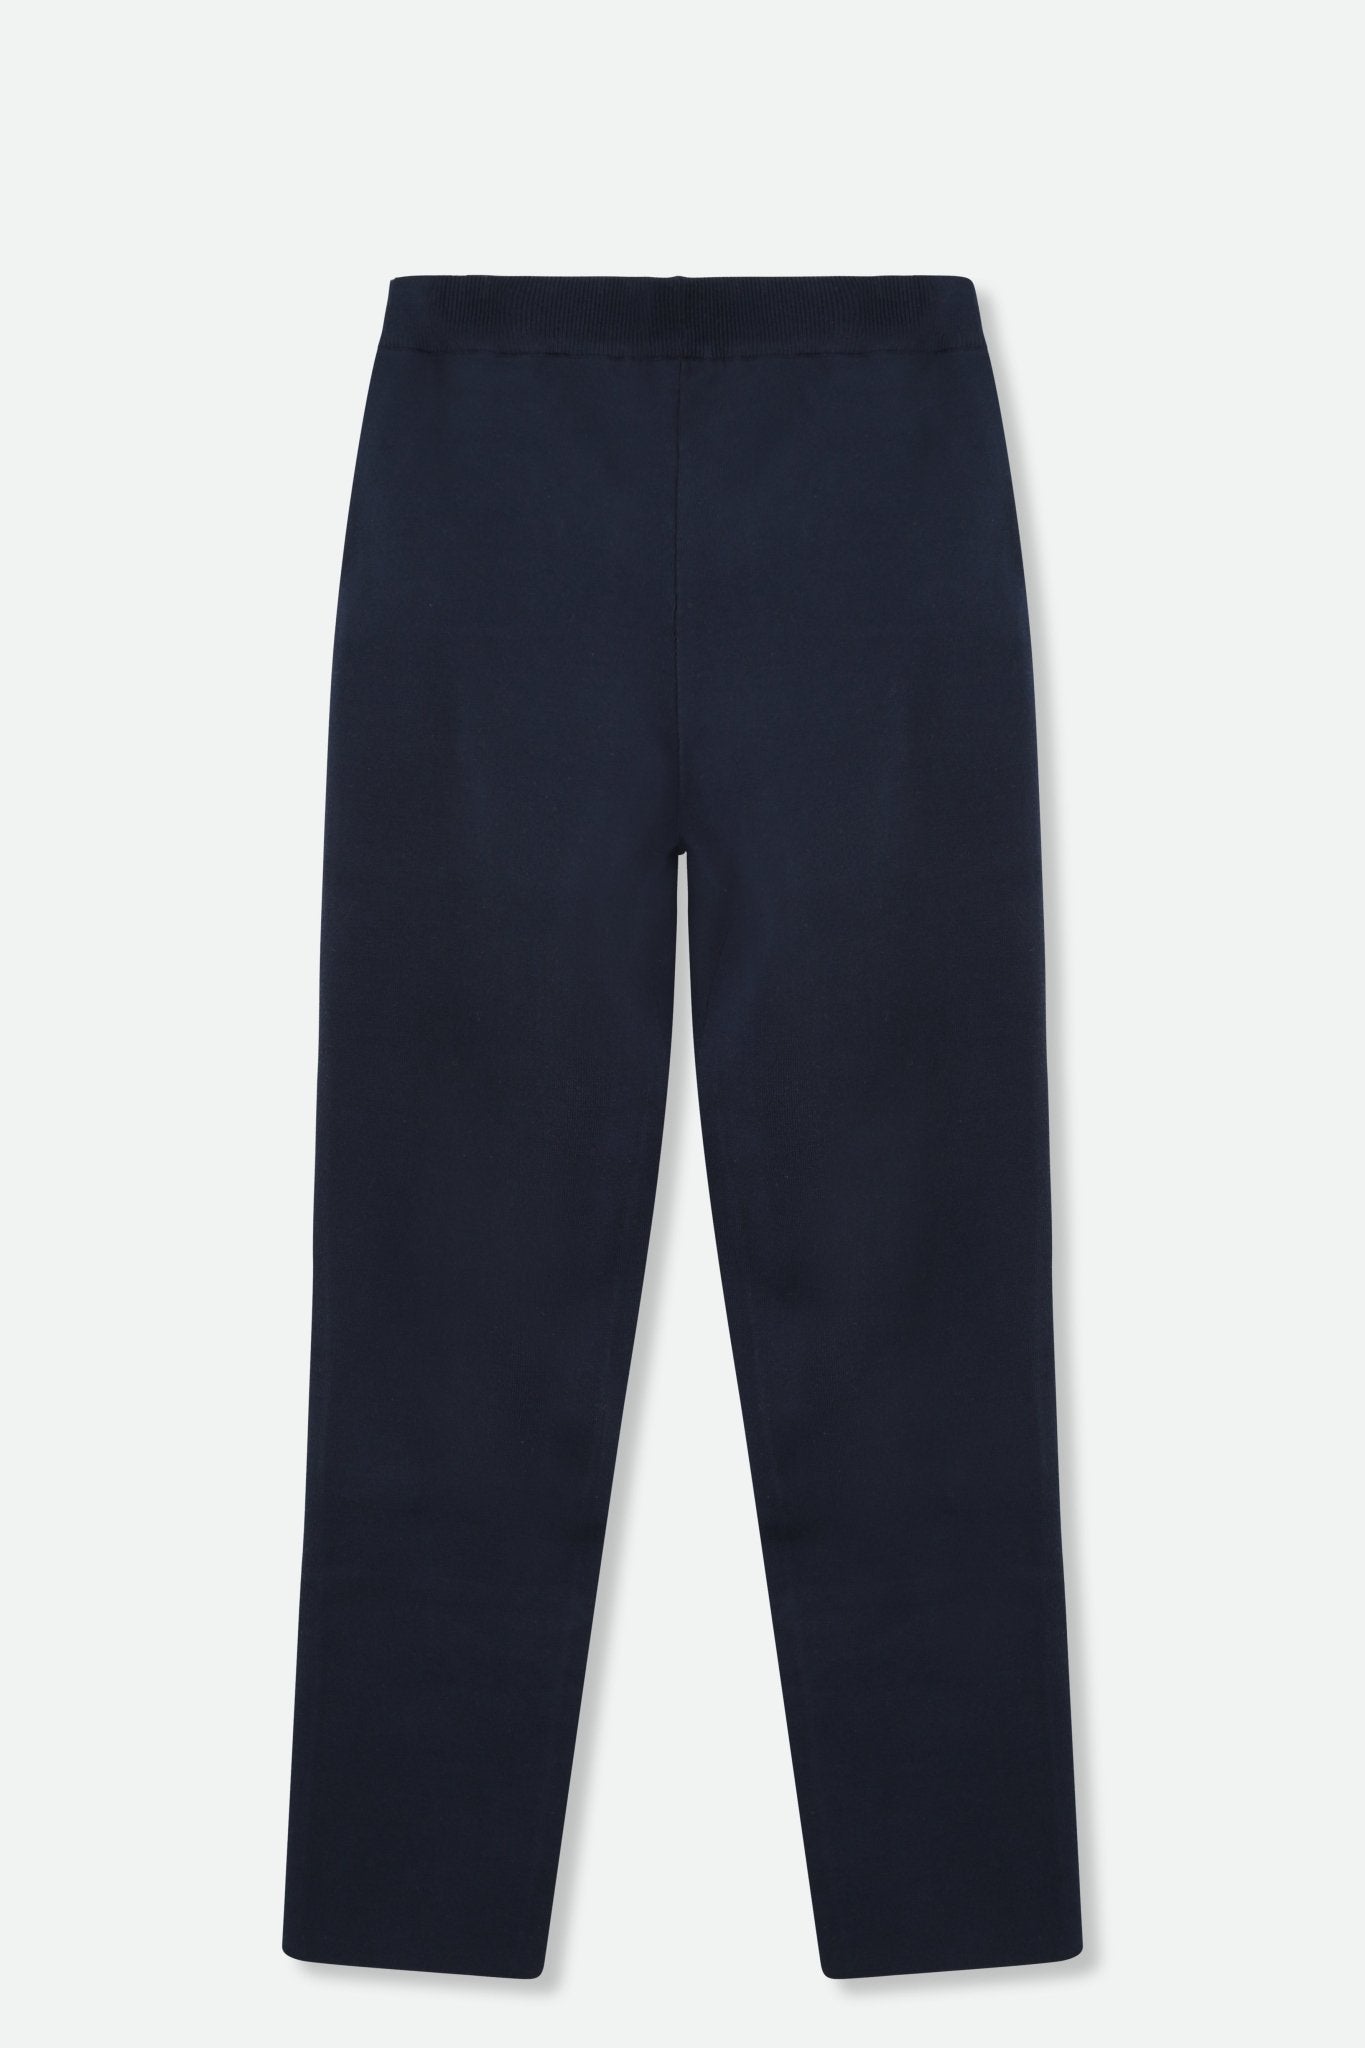 PAIGE PANT IN DOUBLE KNIT PIMA COTTON IN NAVY - Jarbo